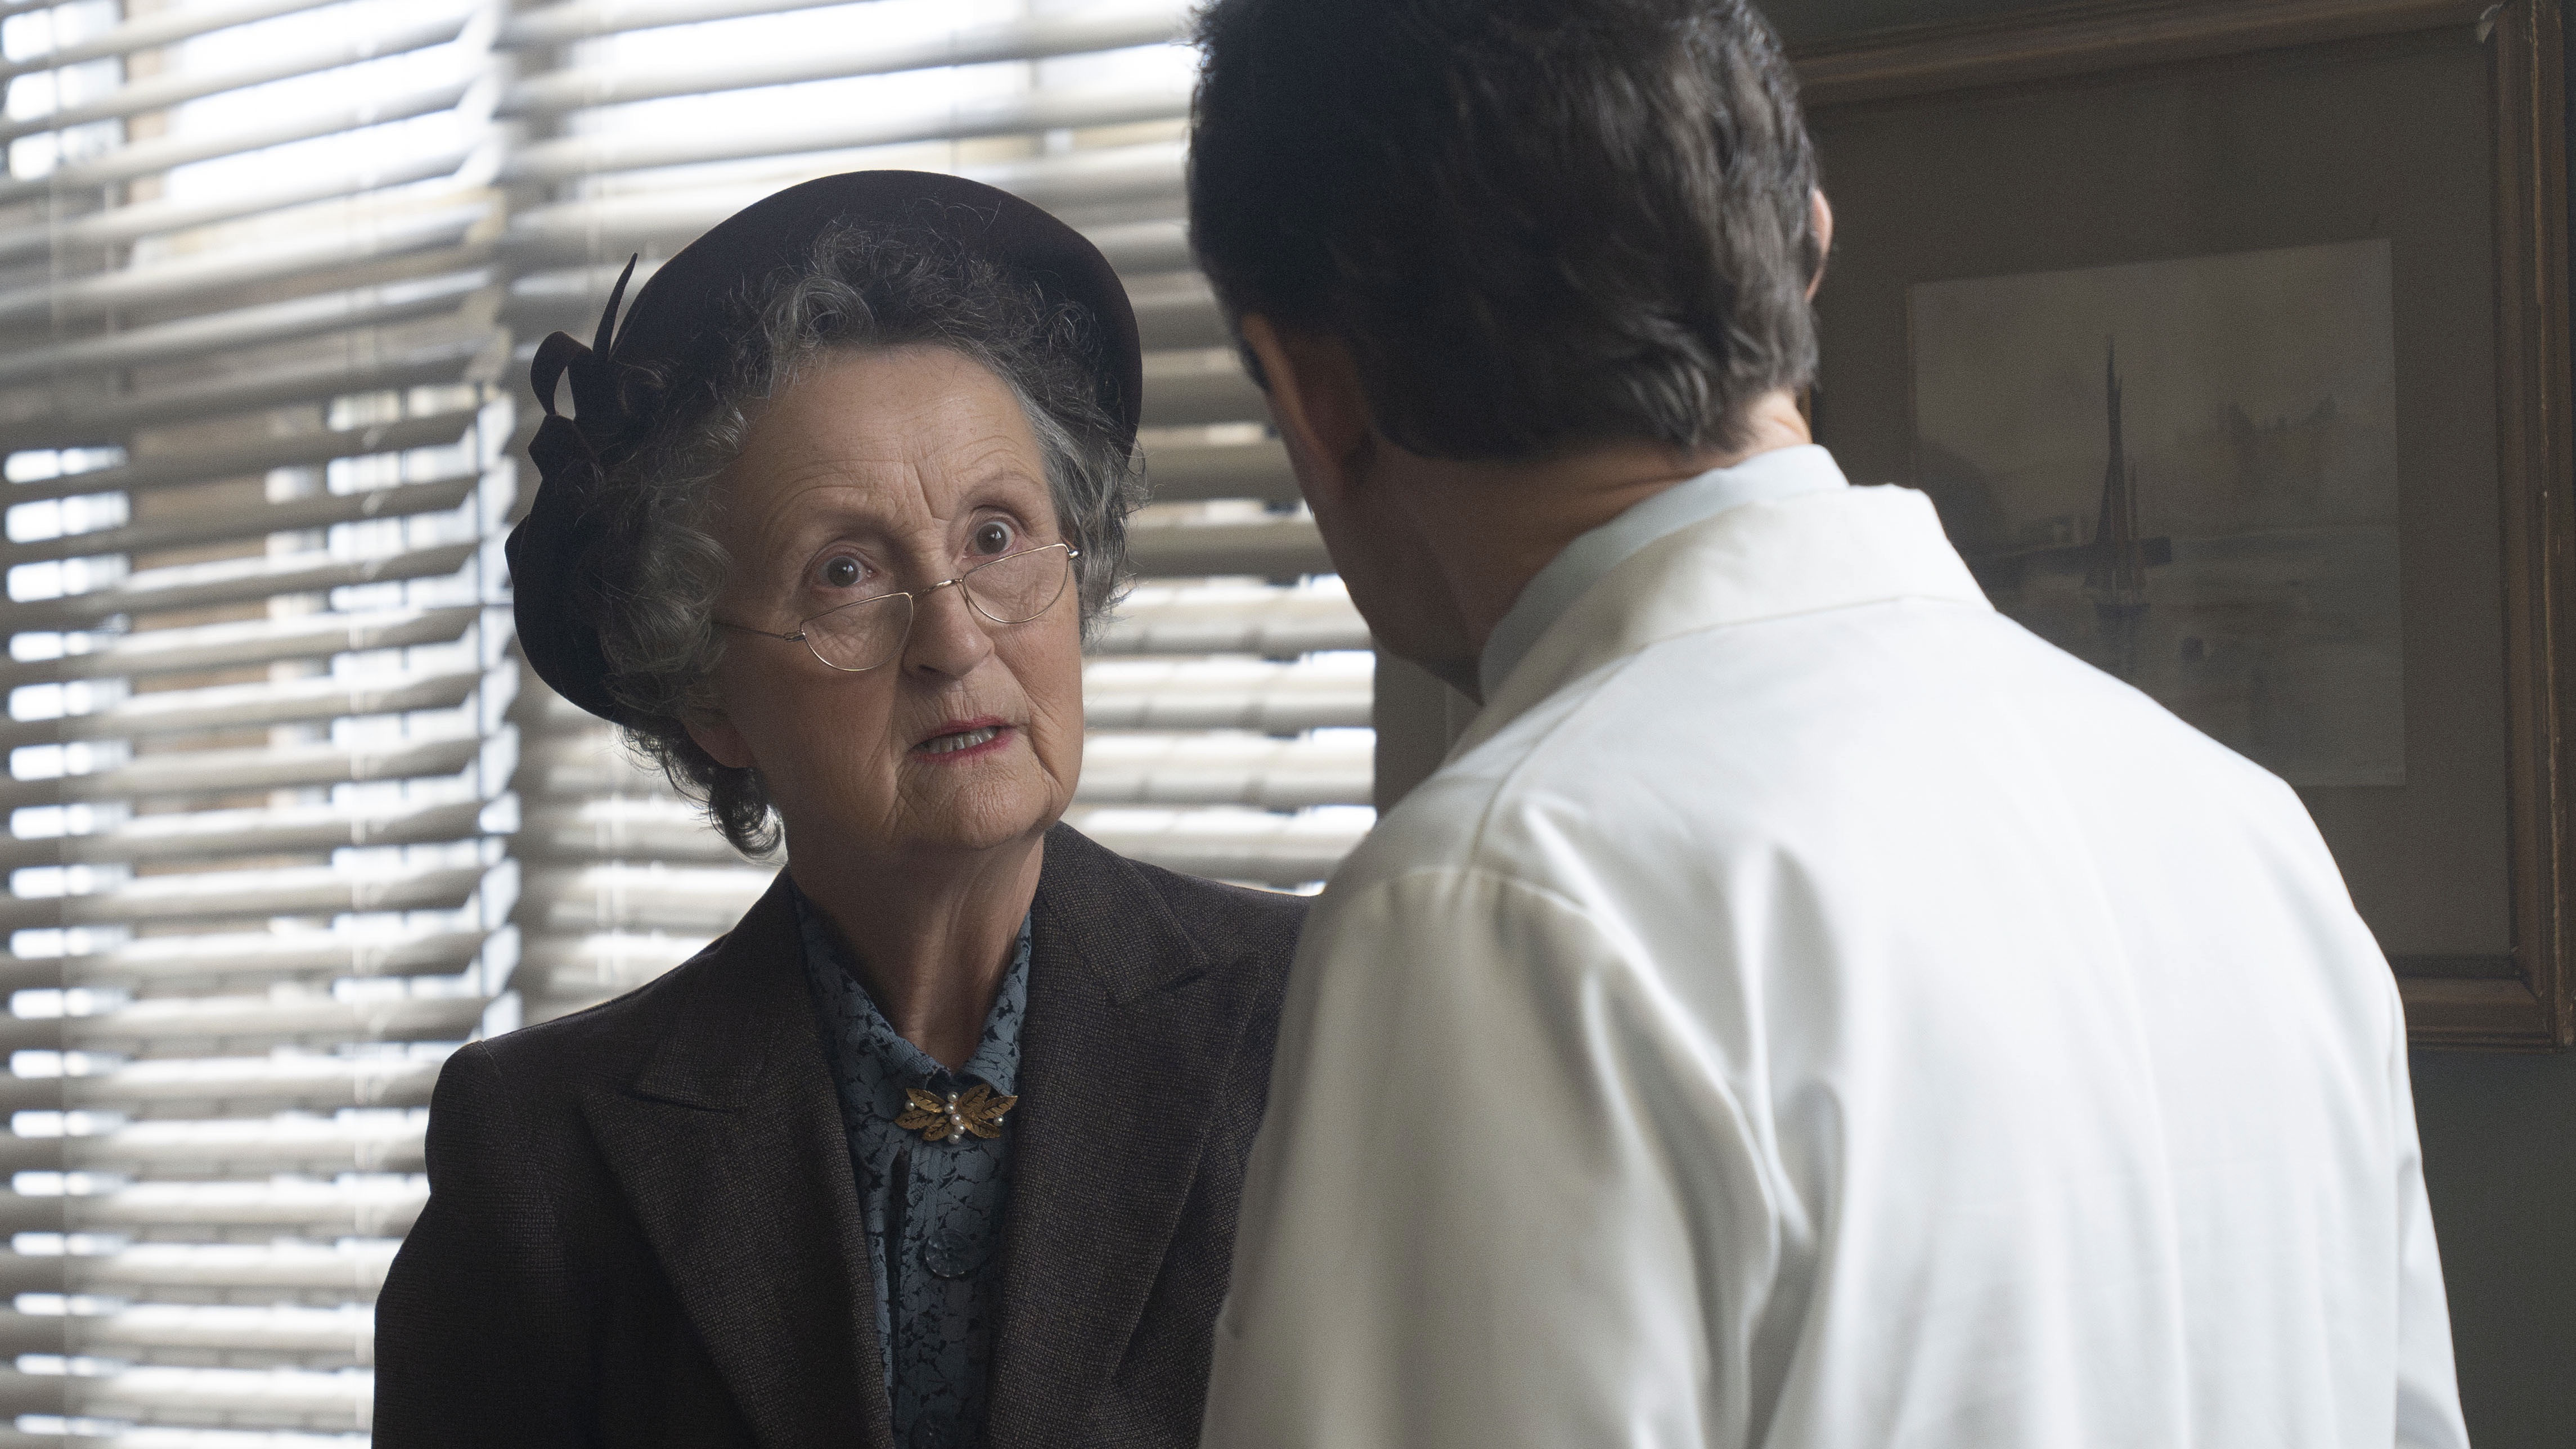 Georgie Glen in a dark suit and hat and glasses as Miss Higgins talks to Stephen McGann in a white coat as Dr Turner in Call the Midwife.